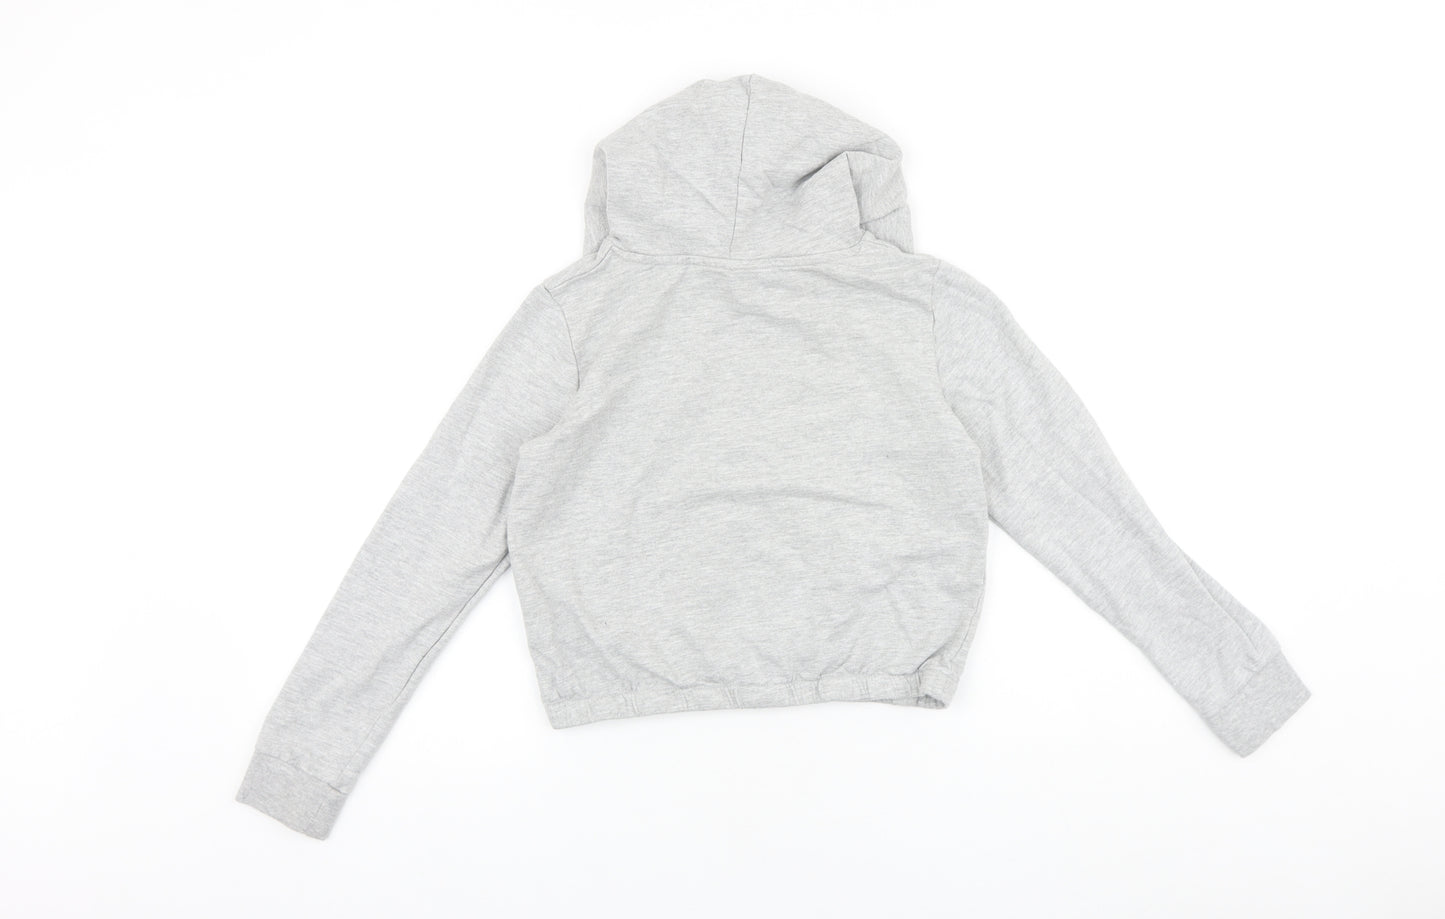 Lily & Dan Girls Grey 100% Cotton Pullover Hoodie Size 10-11 Years Pullover - Happy, Cropped